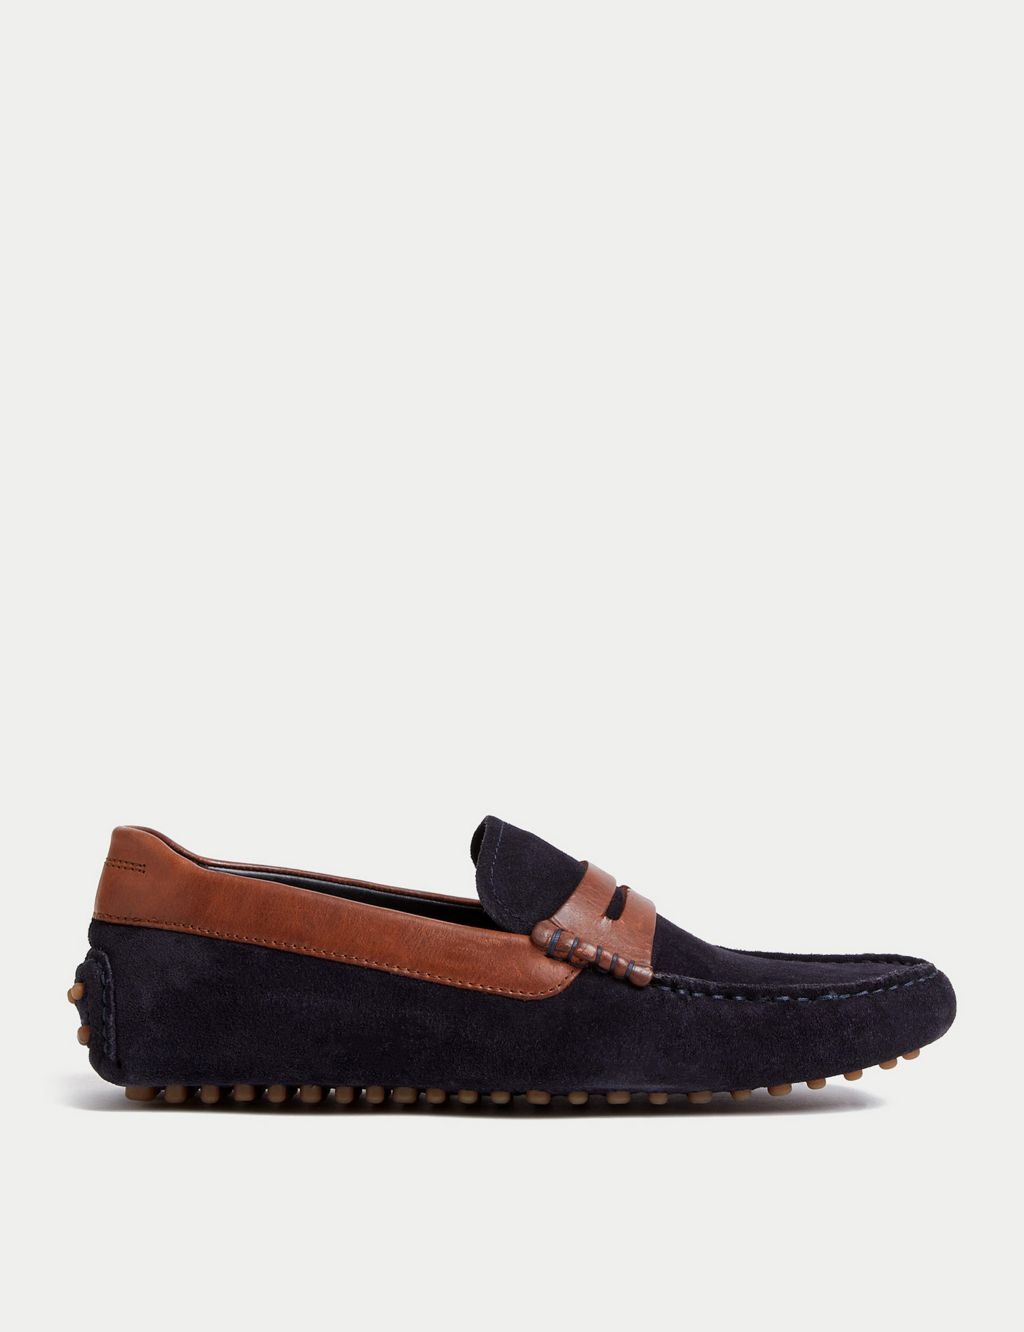 Leather and Suede Slip on Driving Shoes image 1